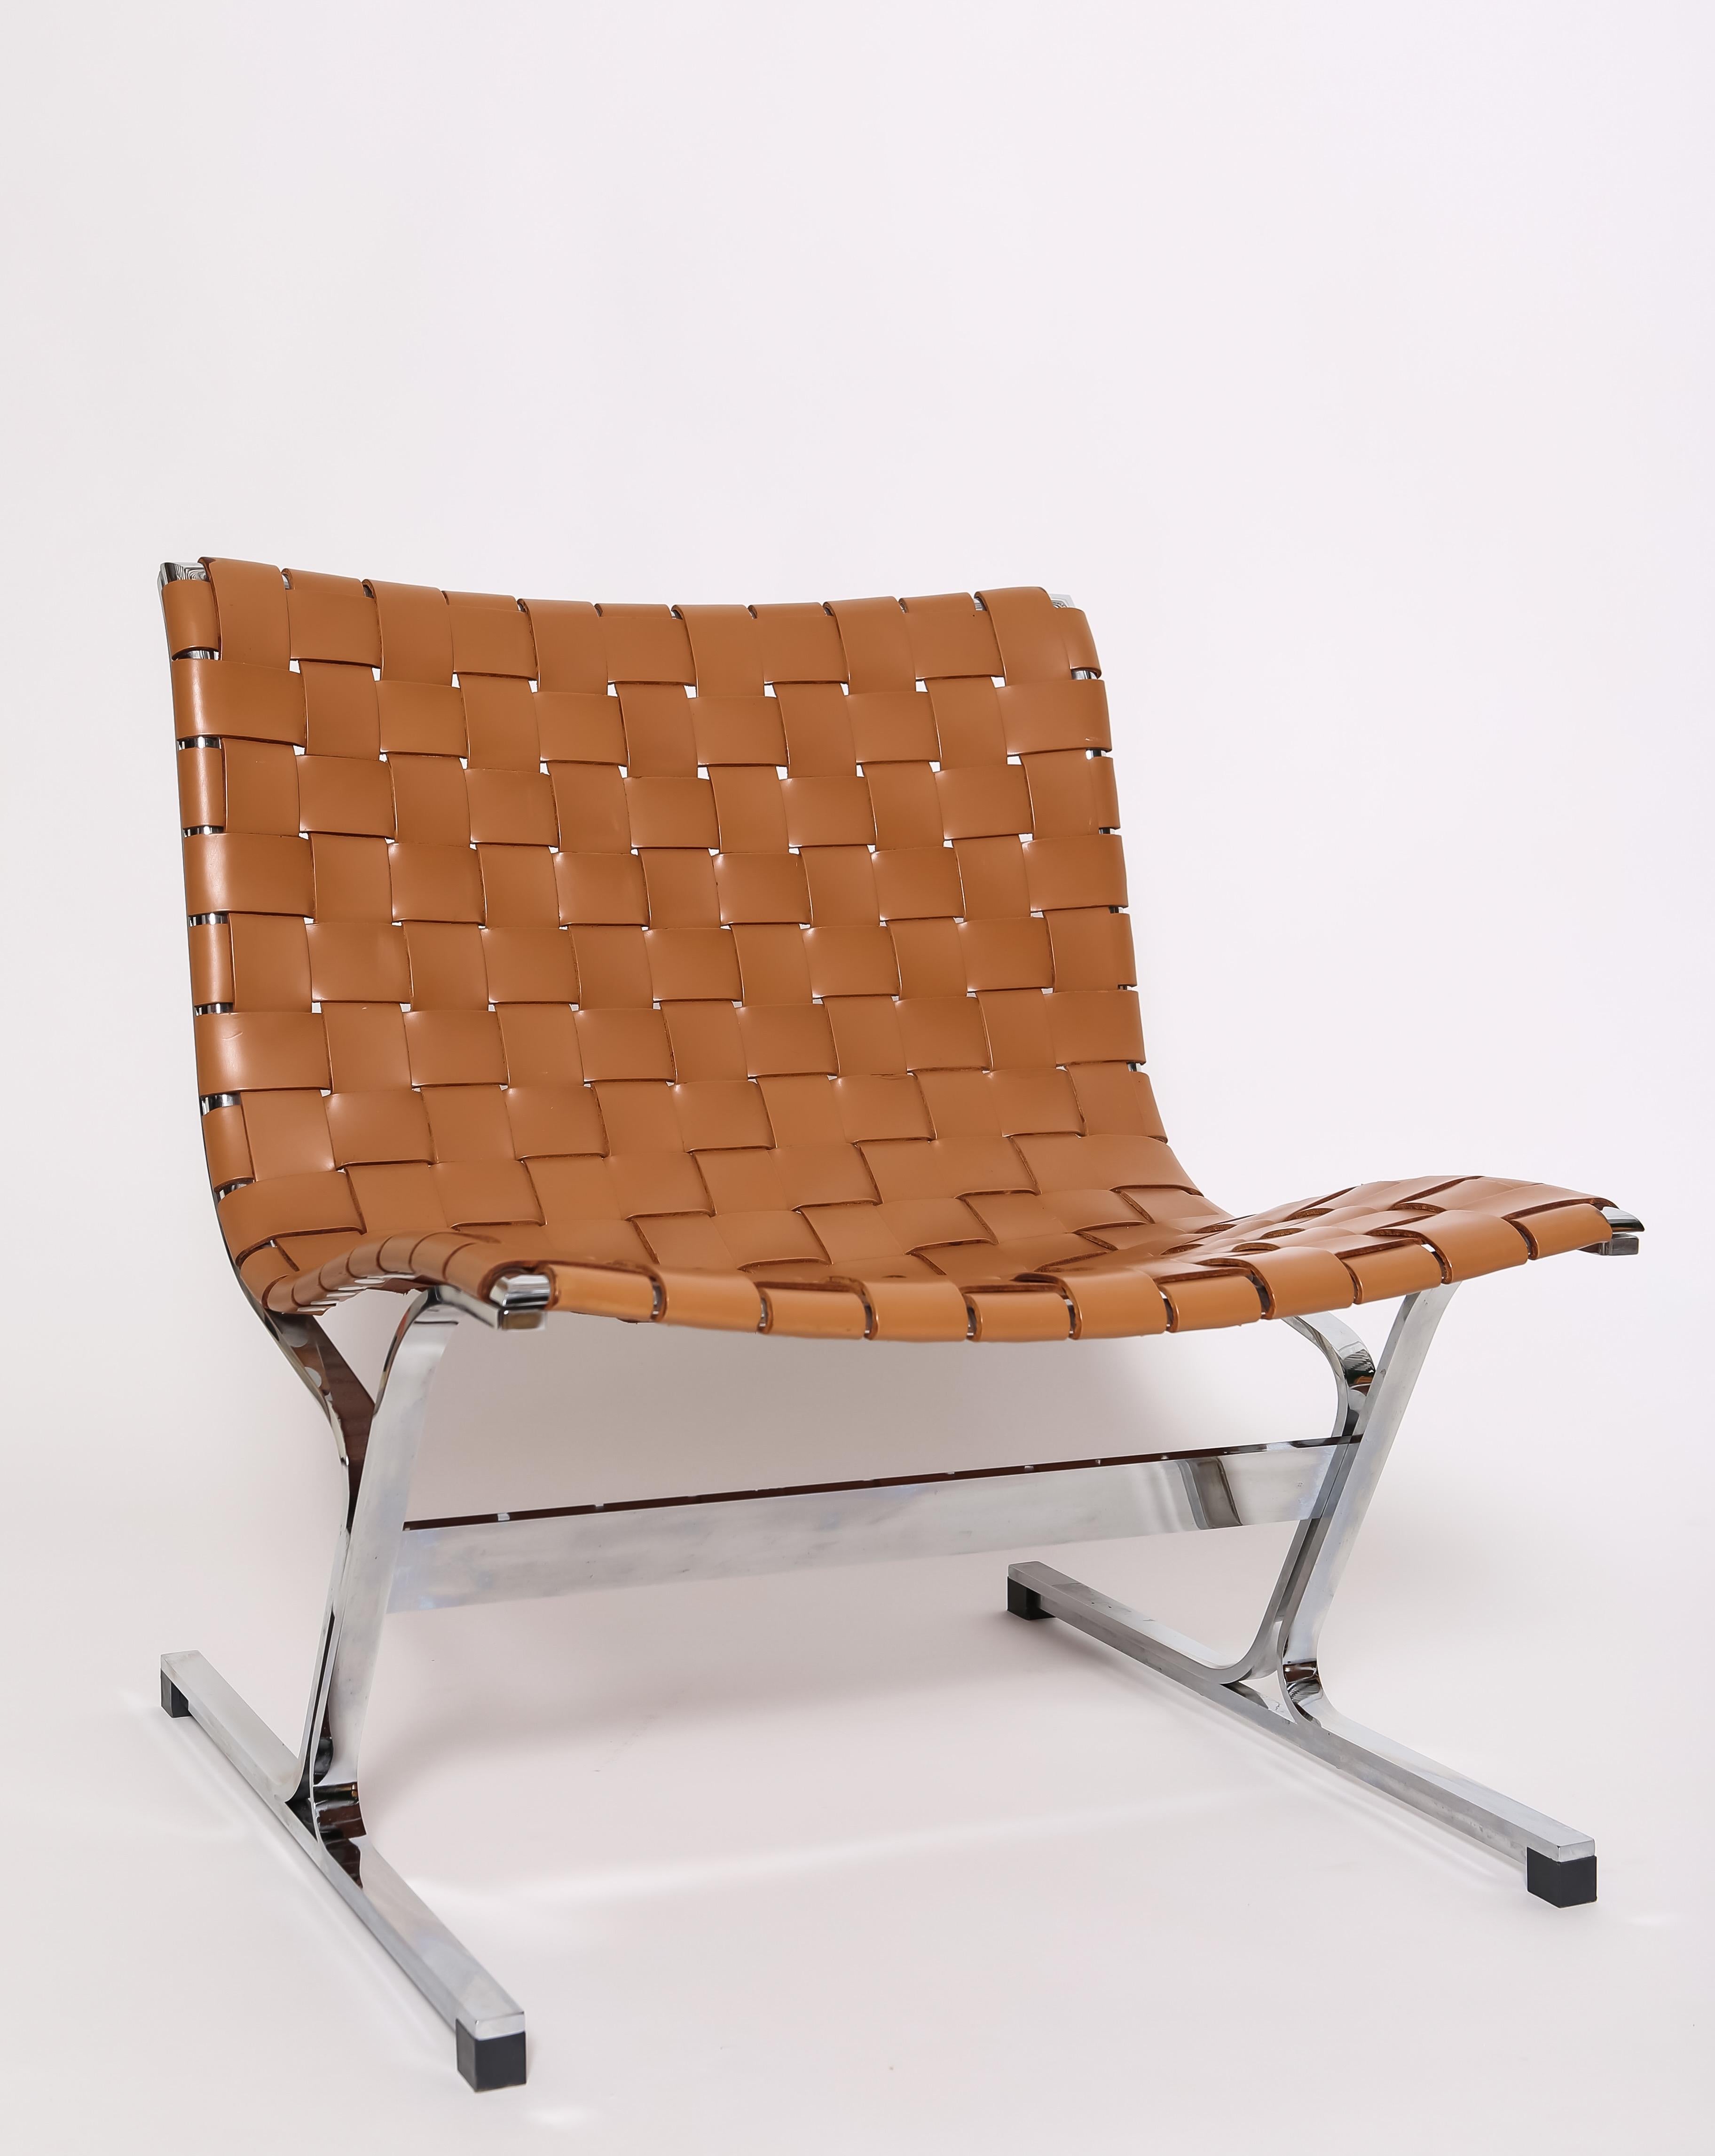 Italian Woven Leather Lounge chairs by Ross Littell